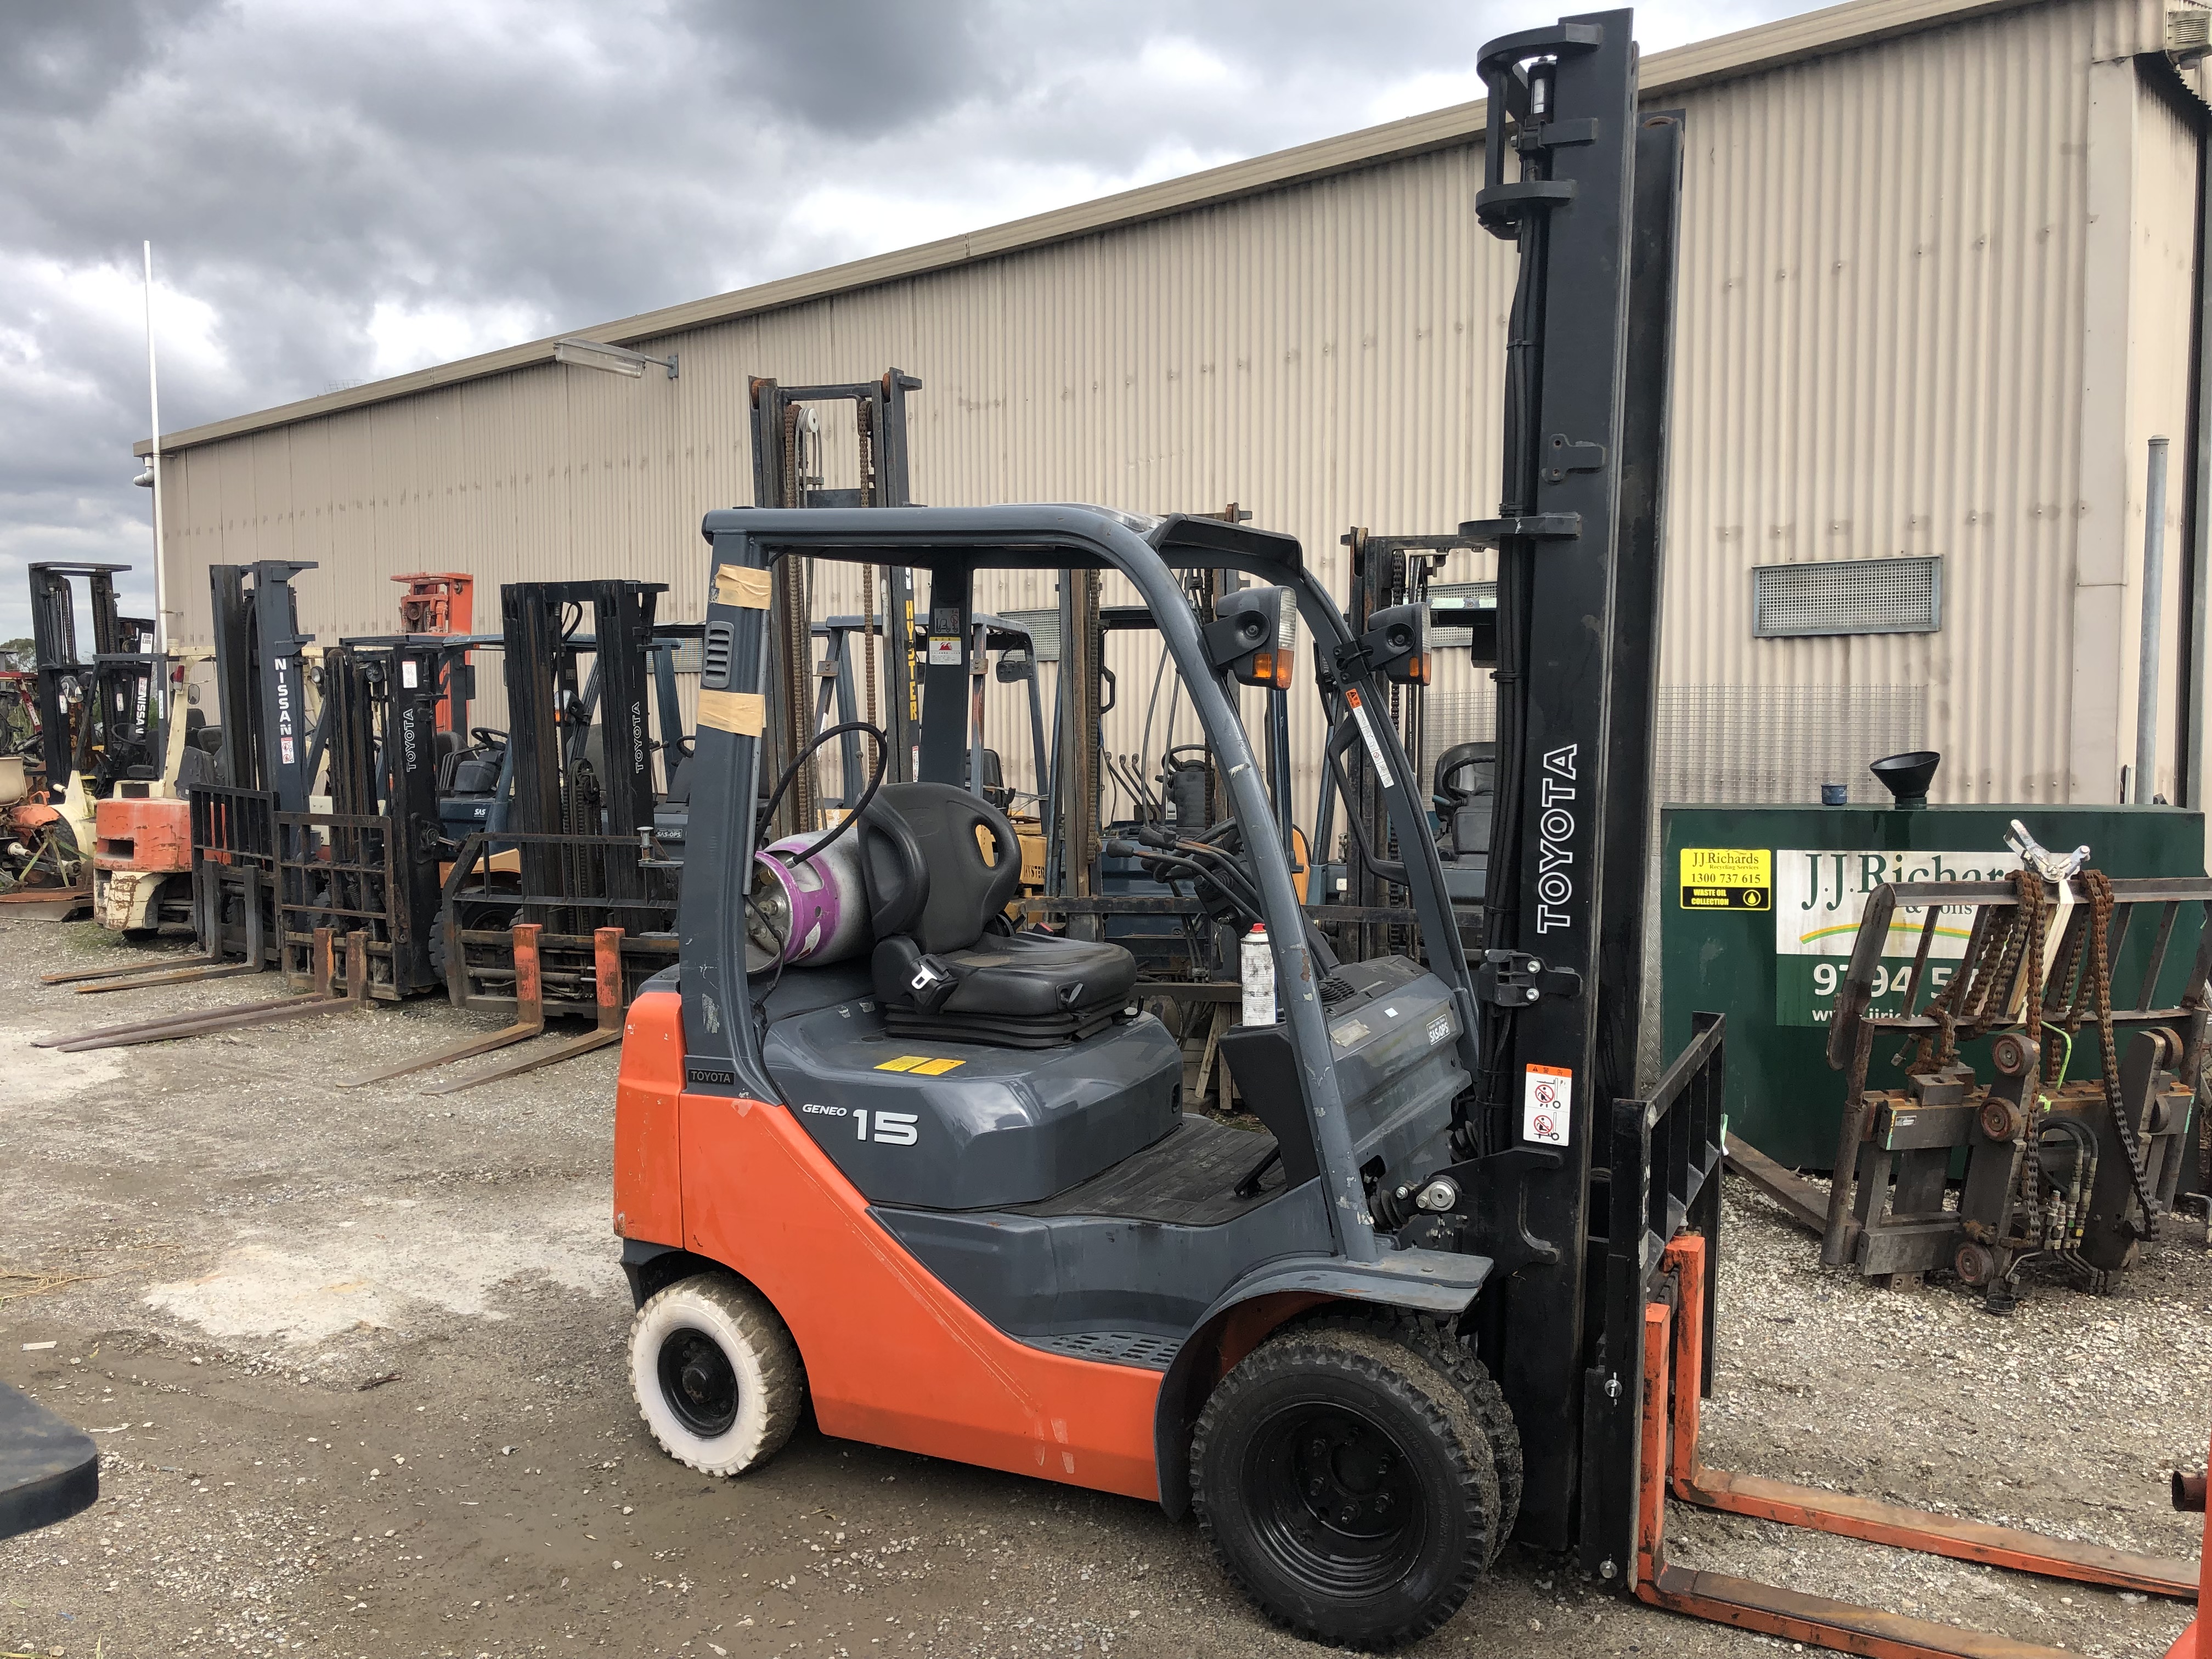 Toyota 8fg15 Dual Wheel 1 5 Ton Forklift Sales Hire Service In Melbourne